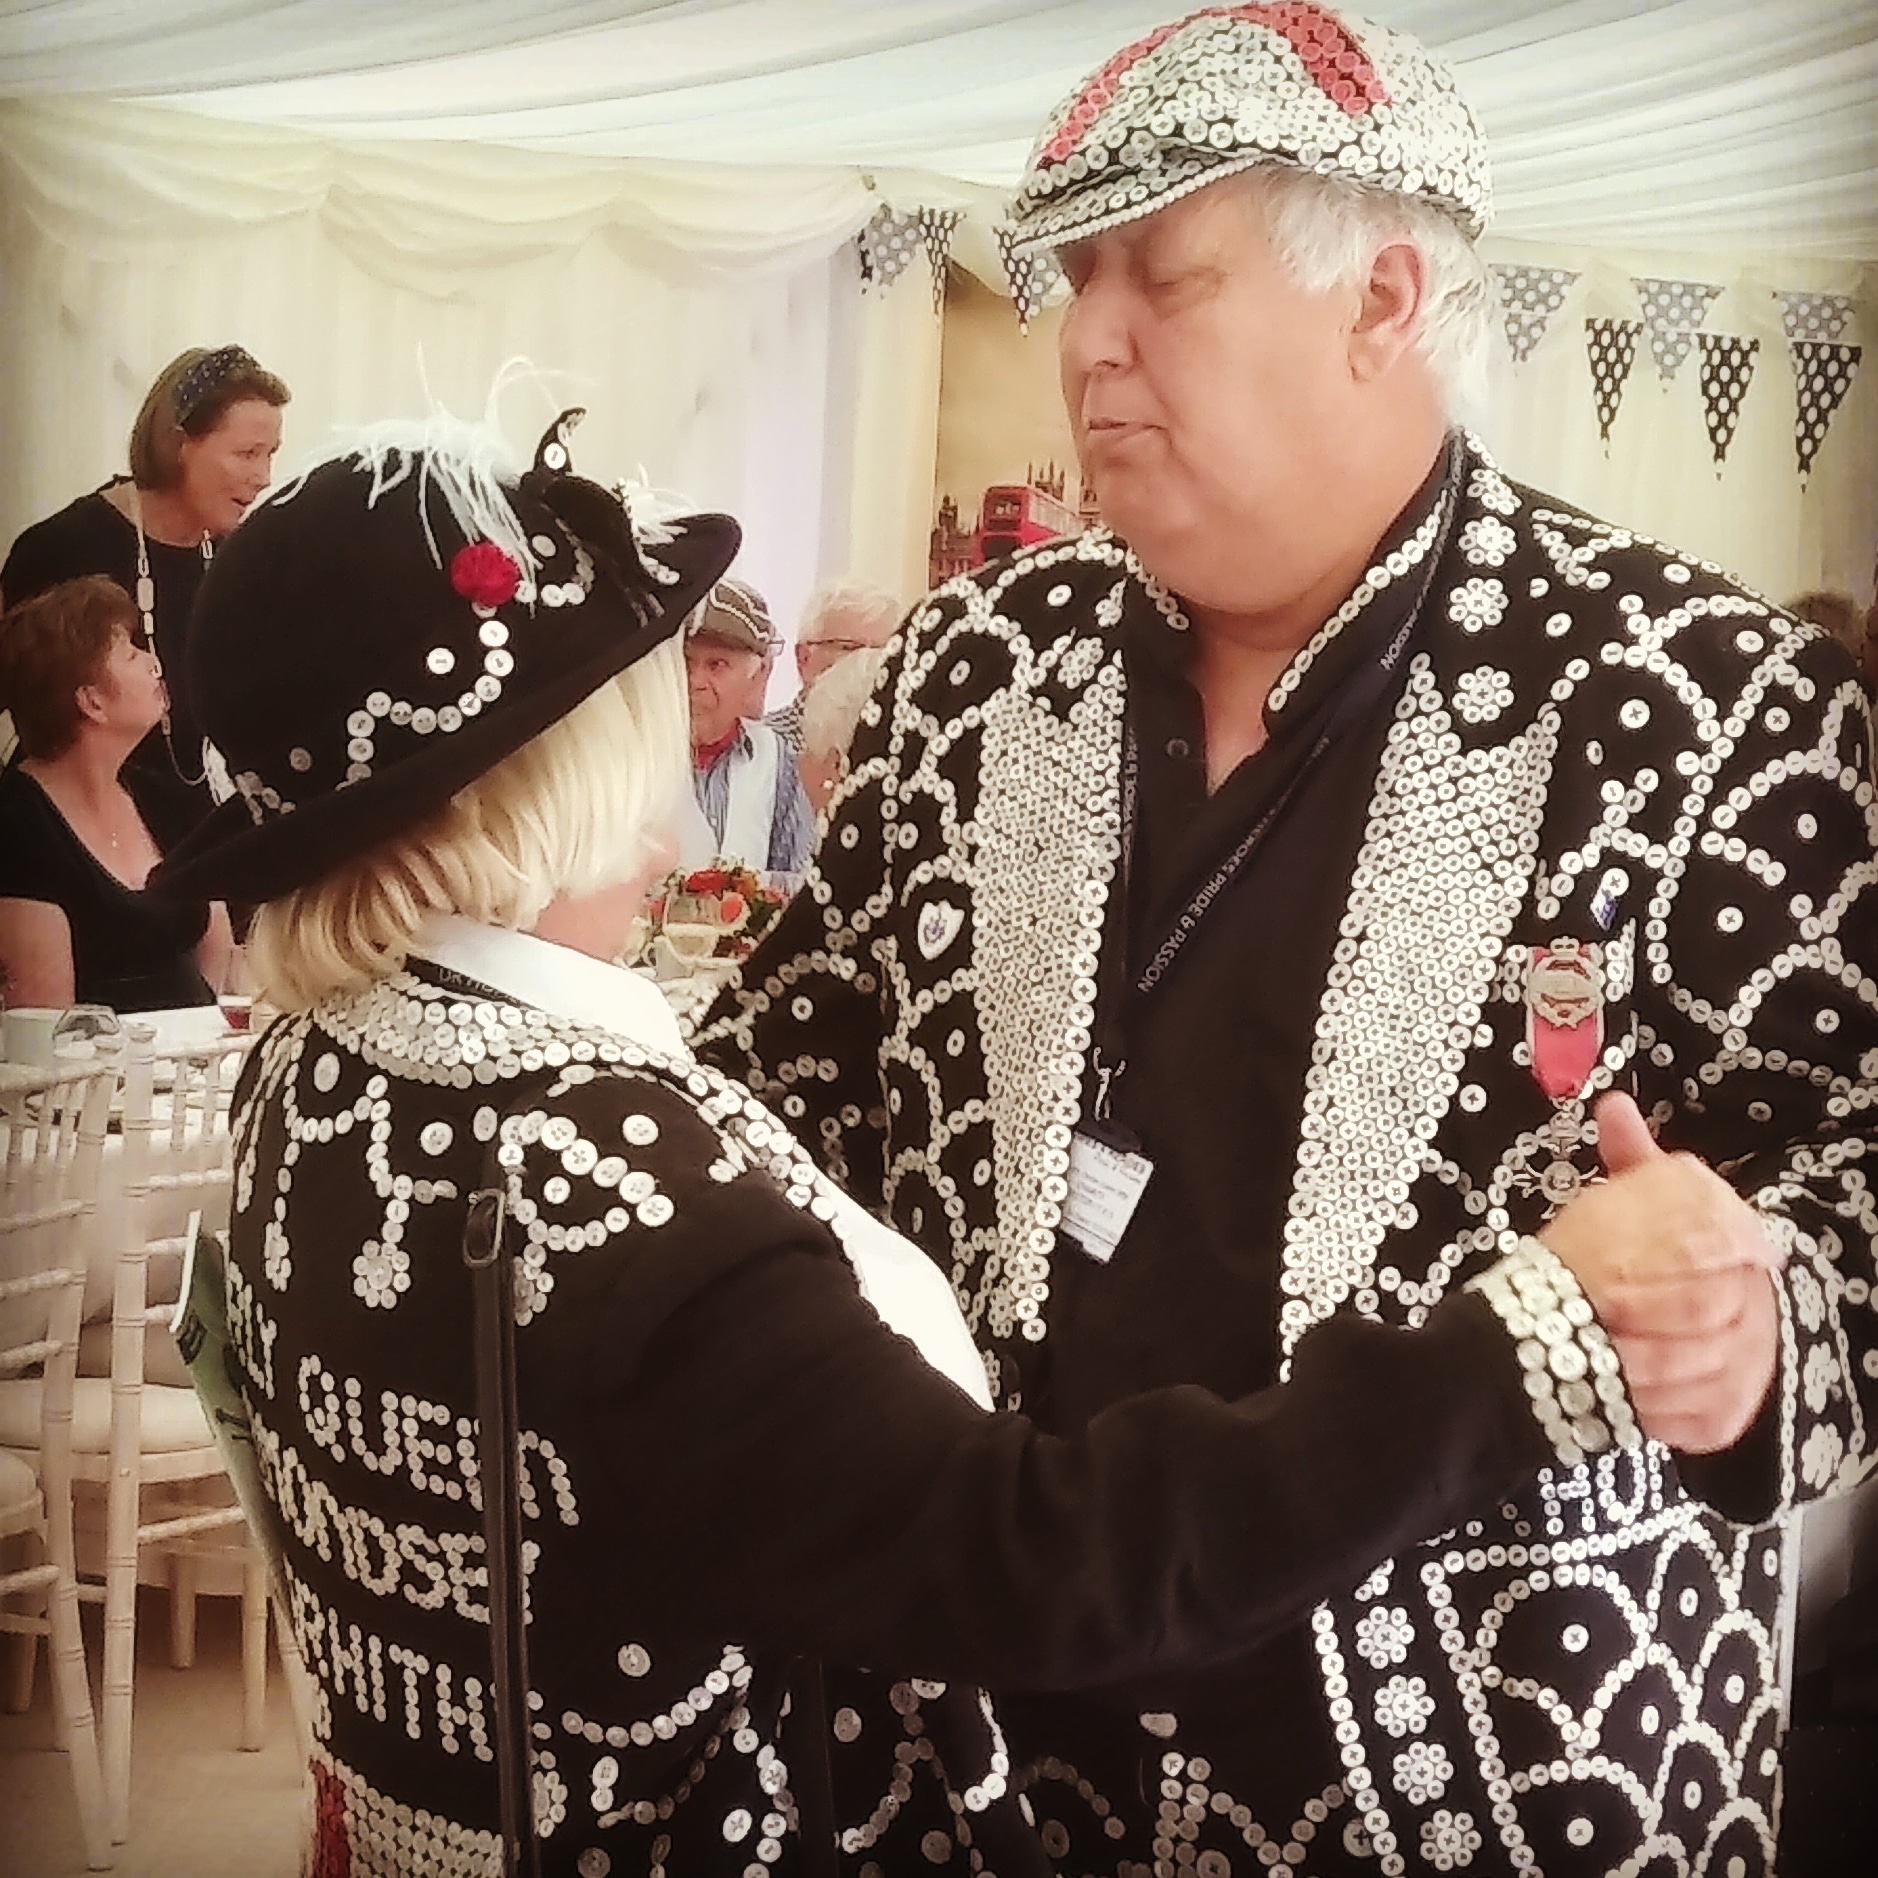 Pearly Kings & Queens at a themed event